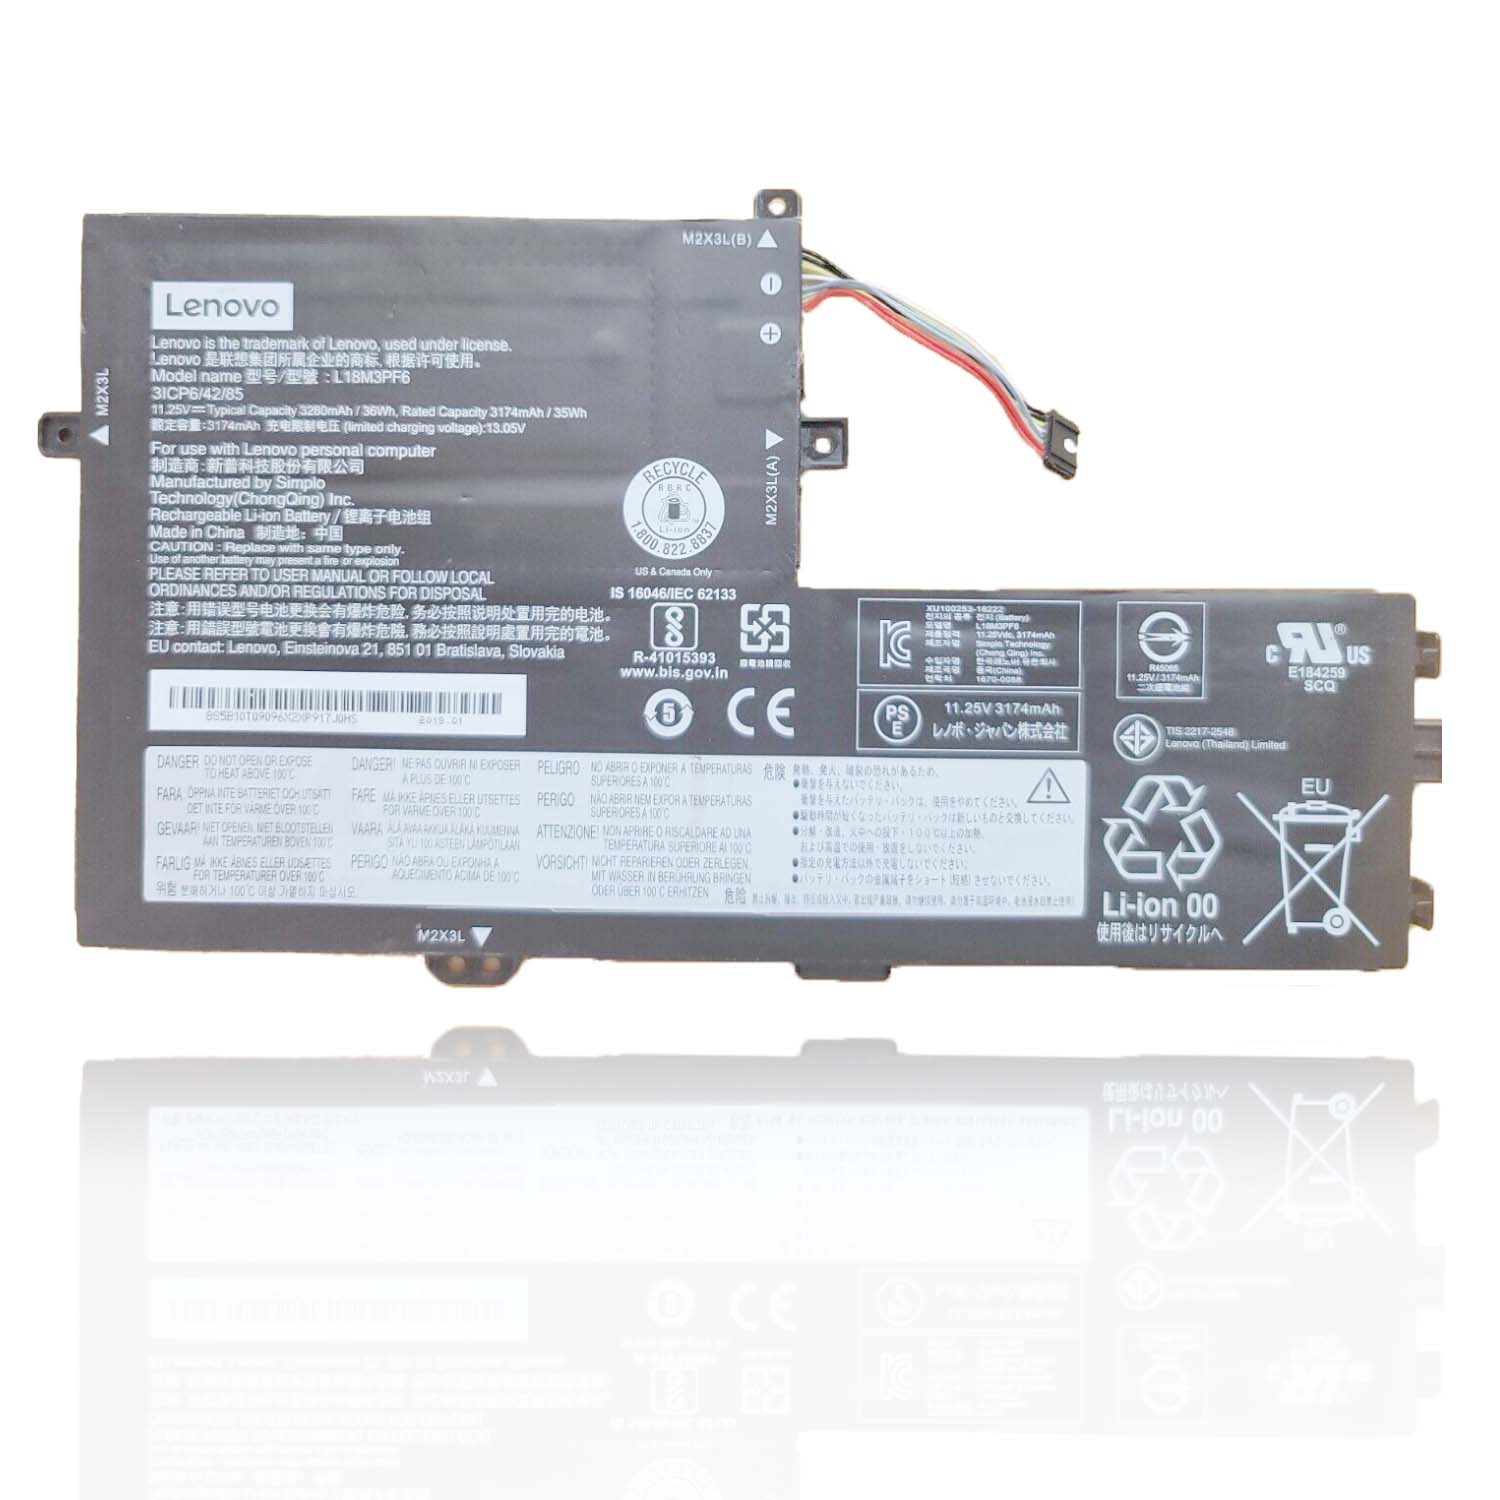 Lapgadgest Battery Image Lapgadgest Battery Image 100% 10 C35 Lenovo L14M3P21 L12M2P21 [11.1V 45Wh 4050mAh 3-Cell] Flex 3 1470 1480 Flex 4 1570 1580 IdeaPad 310S 320S 500S 510S 520S Edge 2-1580 Series L14L3P21 L15M3PB0 L15L3PB Lenovo L14M3P21 L12M2P21 [11.1V 45Wh 4050mAh 3-Cell] Flex 3 1470 1480 Flex 4 1570 1580 IdeaPad 310S 320S 500S 510S 520S Edge 2-1580 Series L14L3P21 L15M3PB0 L15L3PB Turn on screen reader support To enable screen reader support, press Ctrl+Alt+Z To learn about keyboard shortcuts, press Ctrl+slash